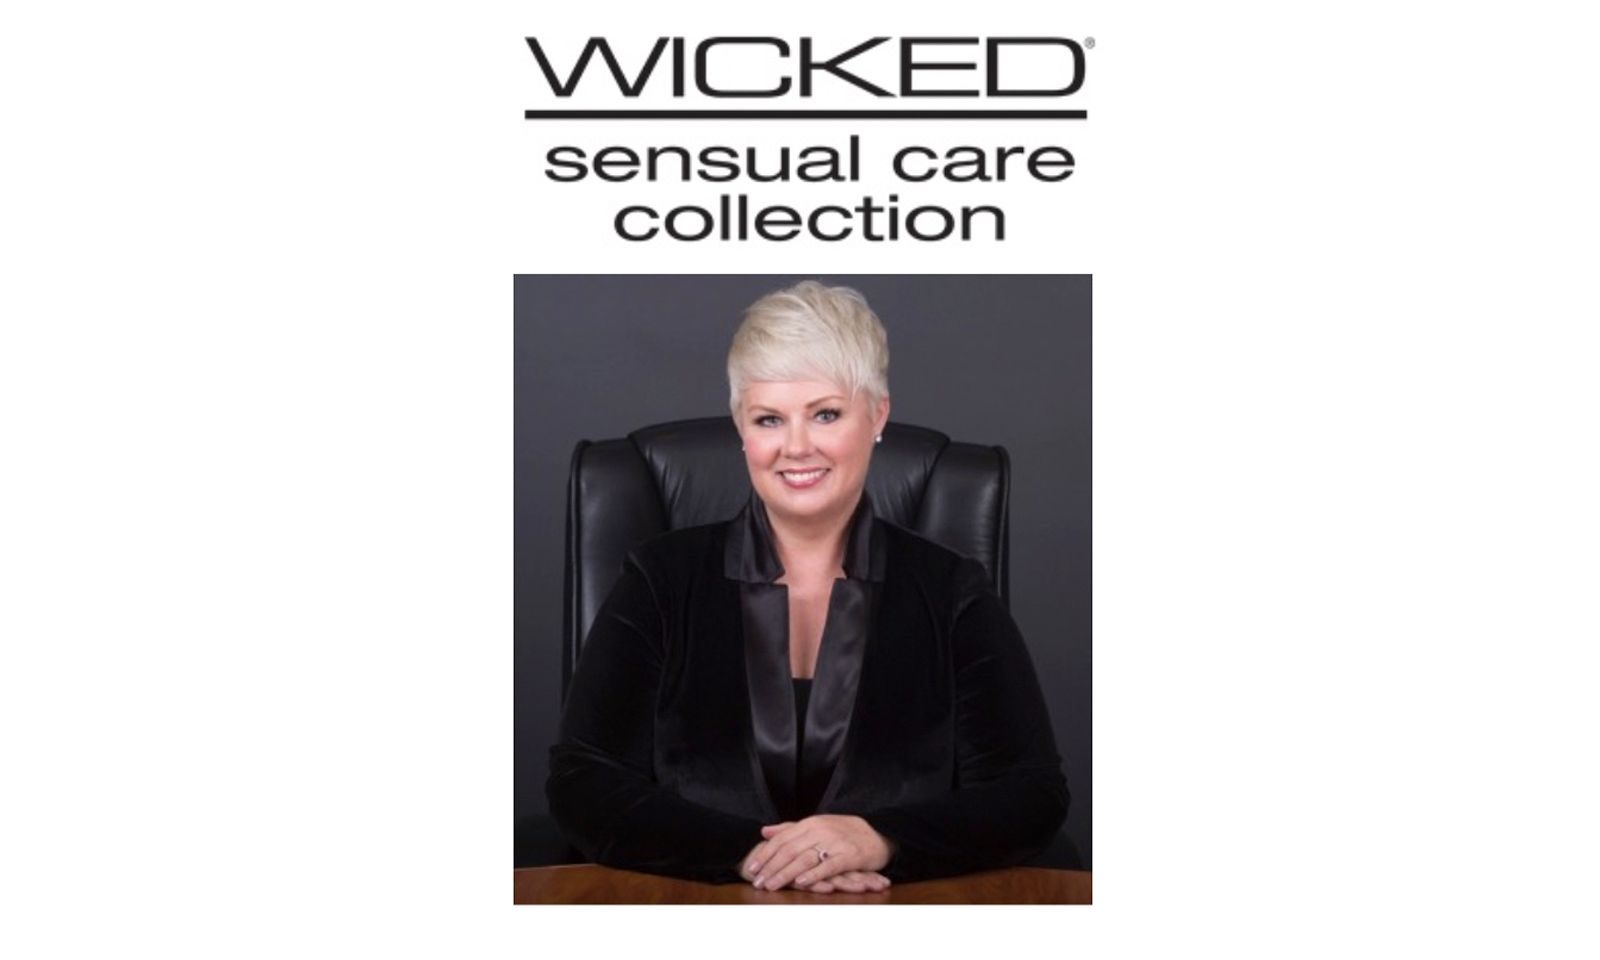 Jennifer Brice Named Director of Sales at Wicked Sensual Care